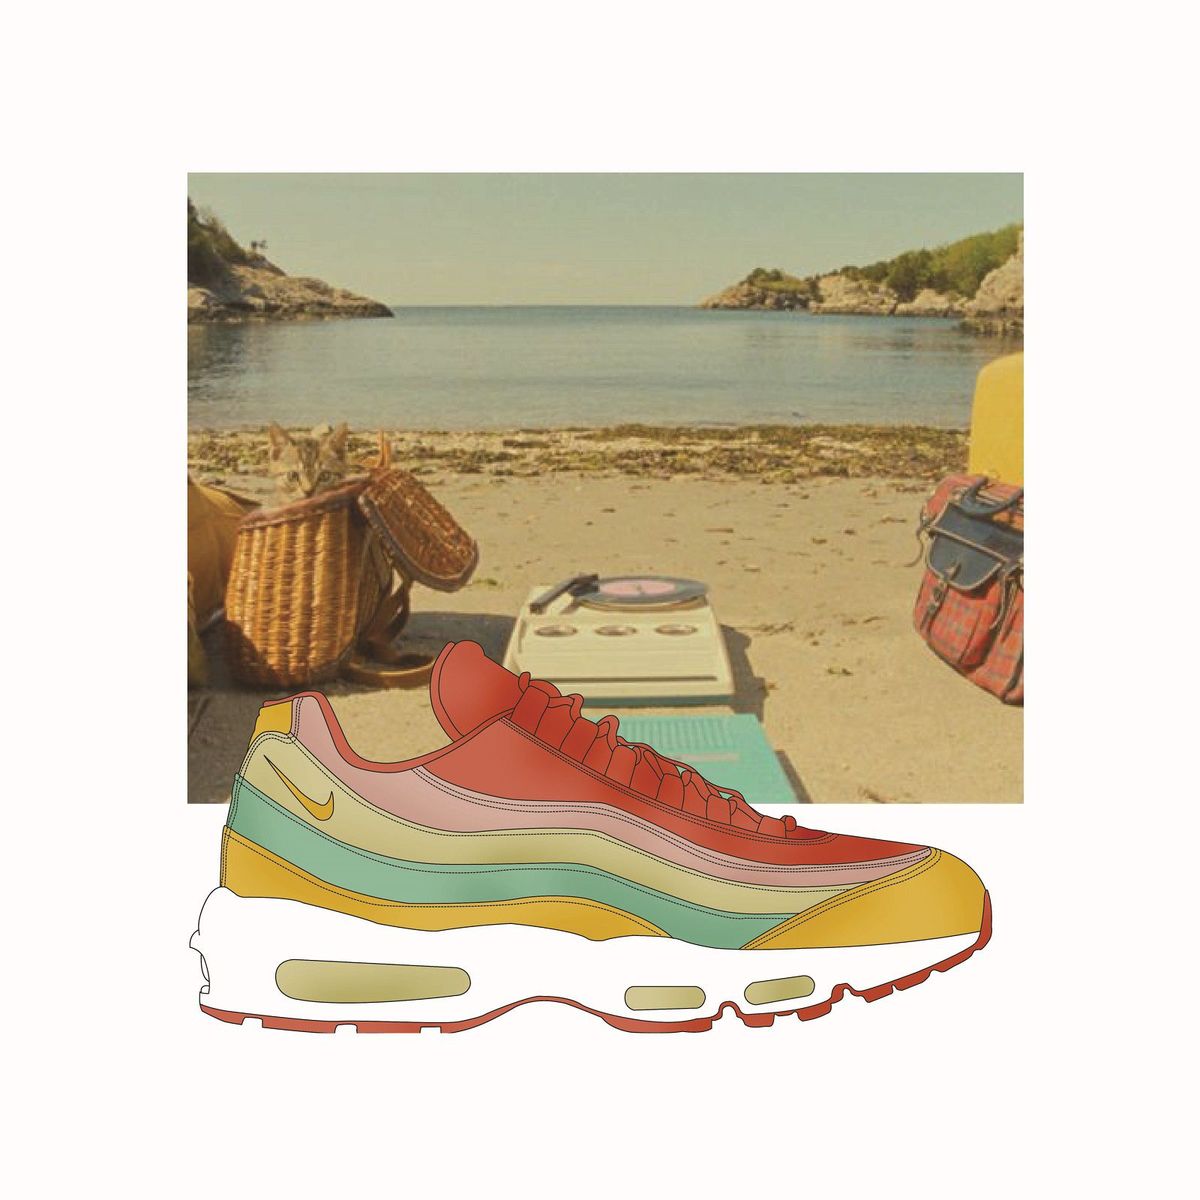 New Artwork Combines Wes Anderson’s Creations With Modern Footwear 